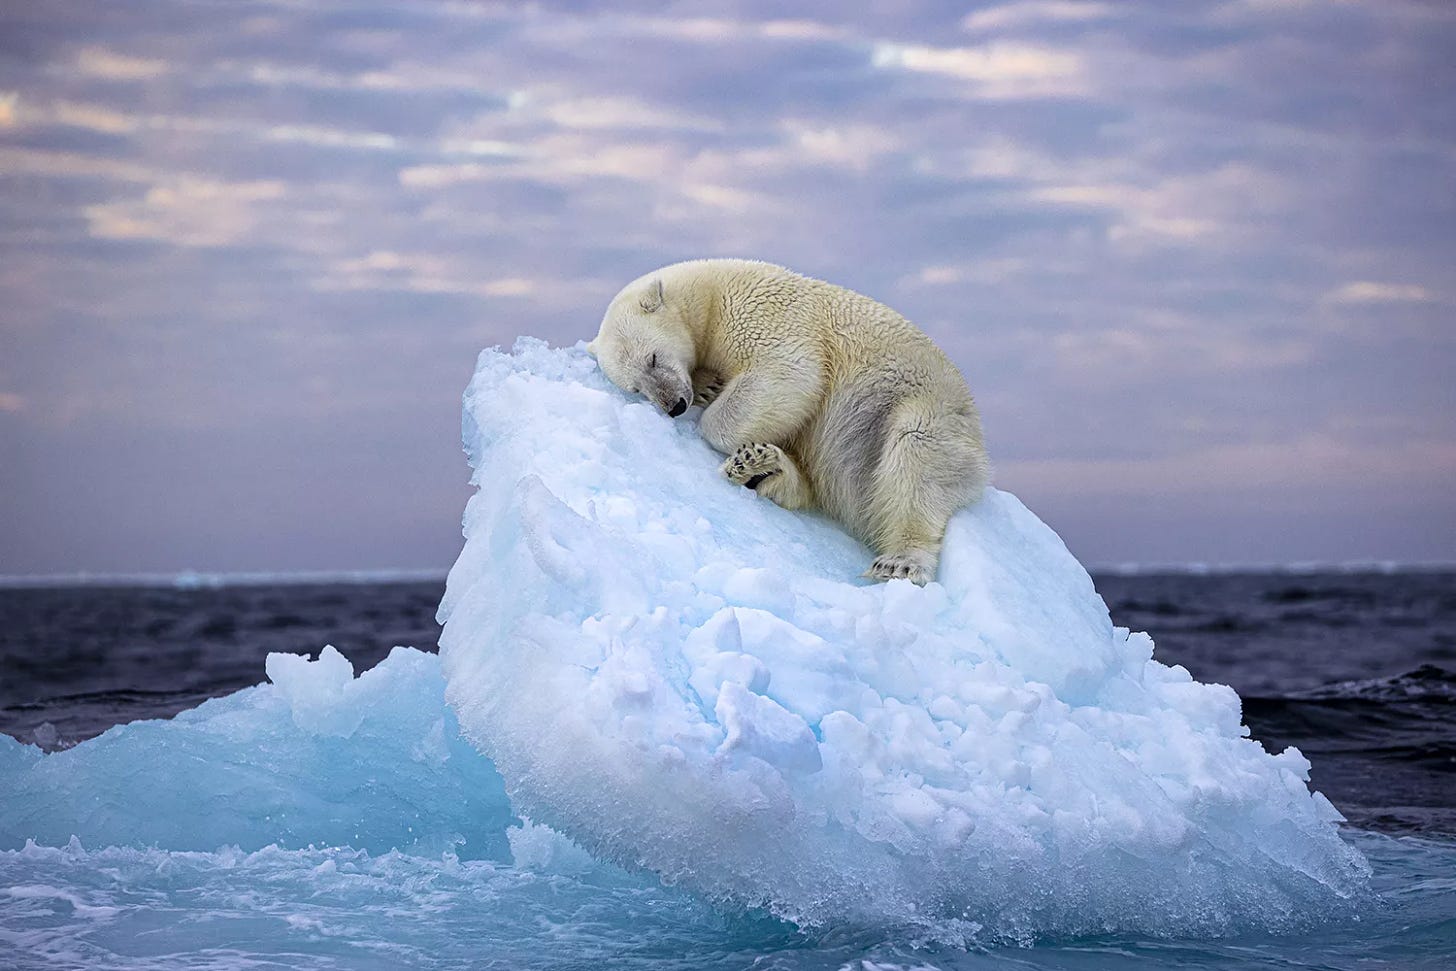 Wildlife Photographer of the Year - Ice Bed